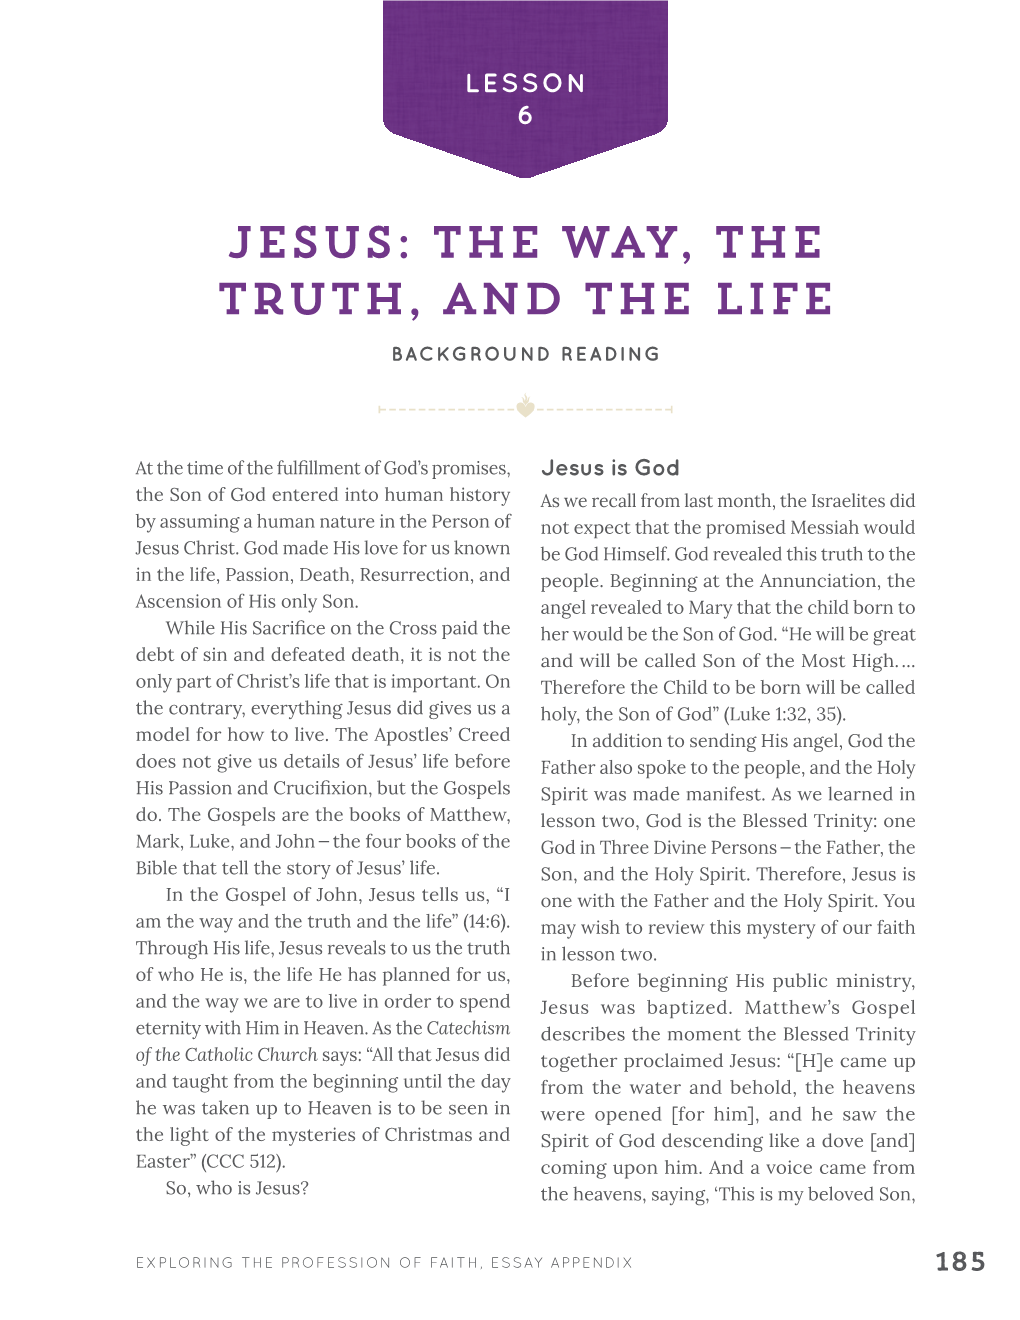 Jesus: the Way, the Truth, and the Life BACKGROUND READING